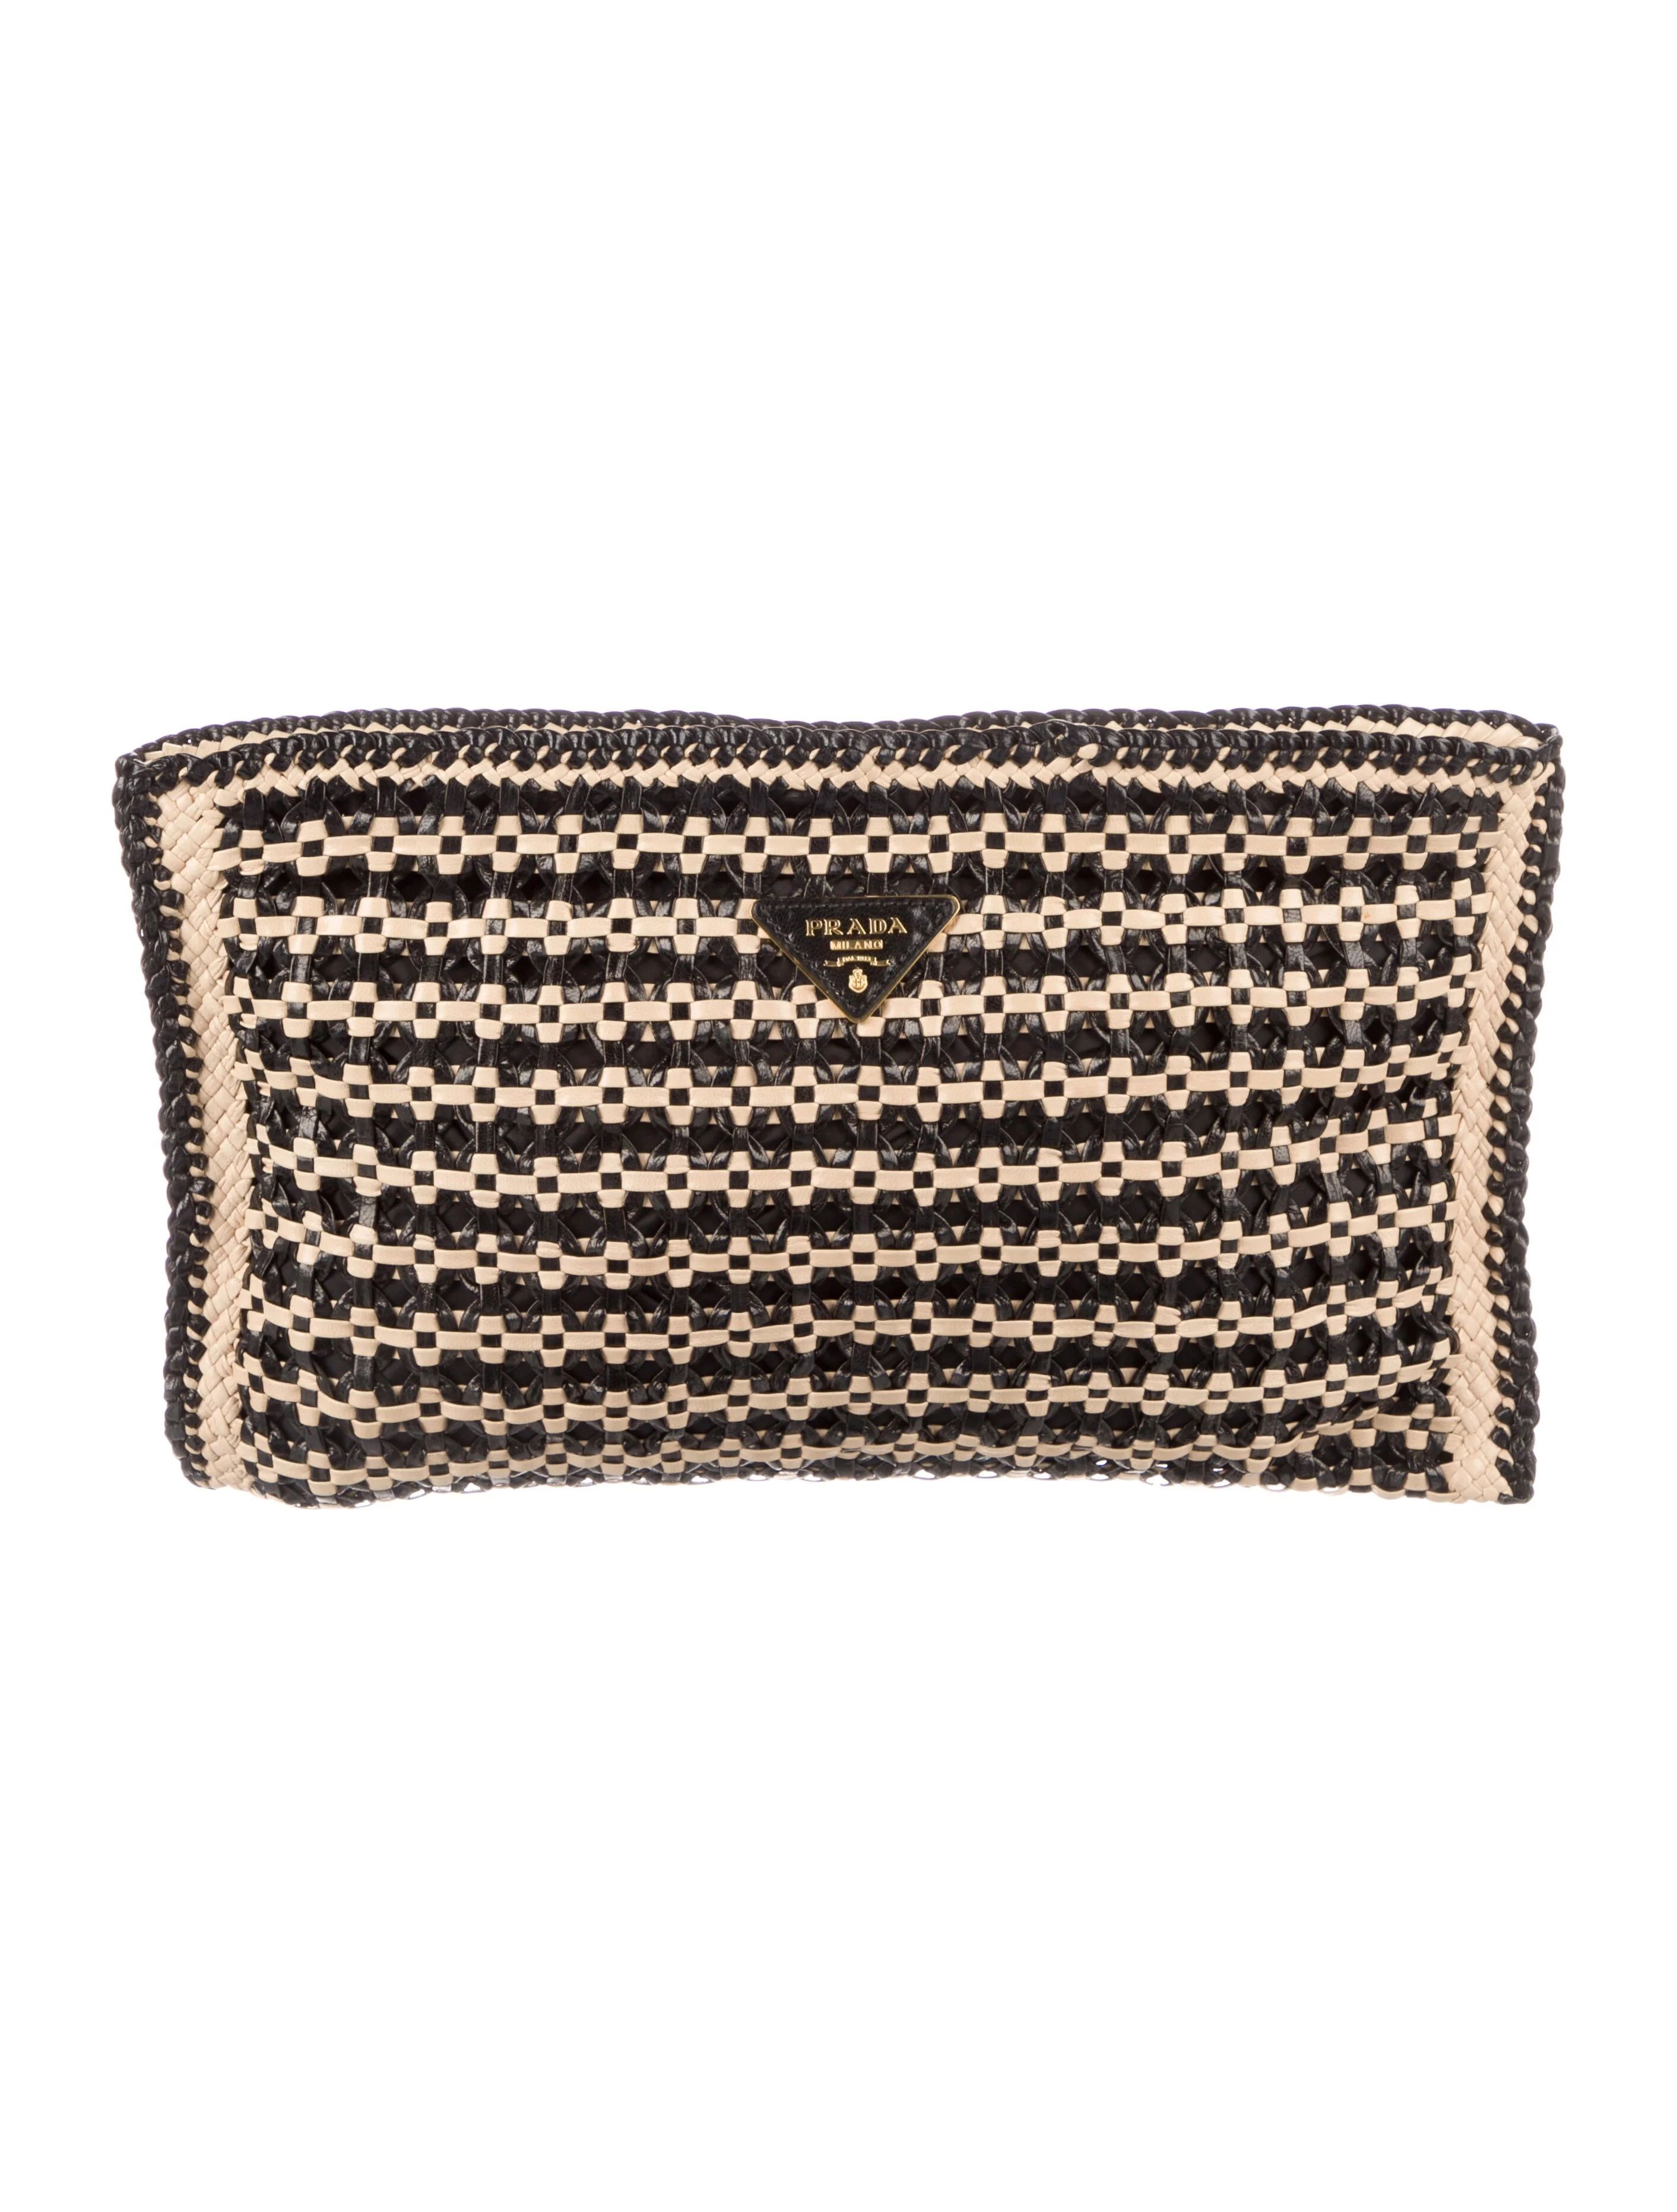 Madras Clutch | The RealReal